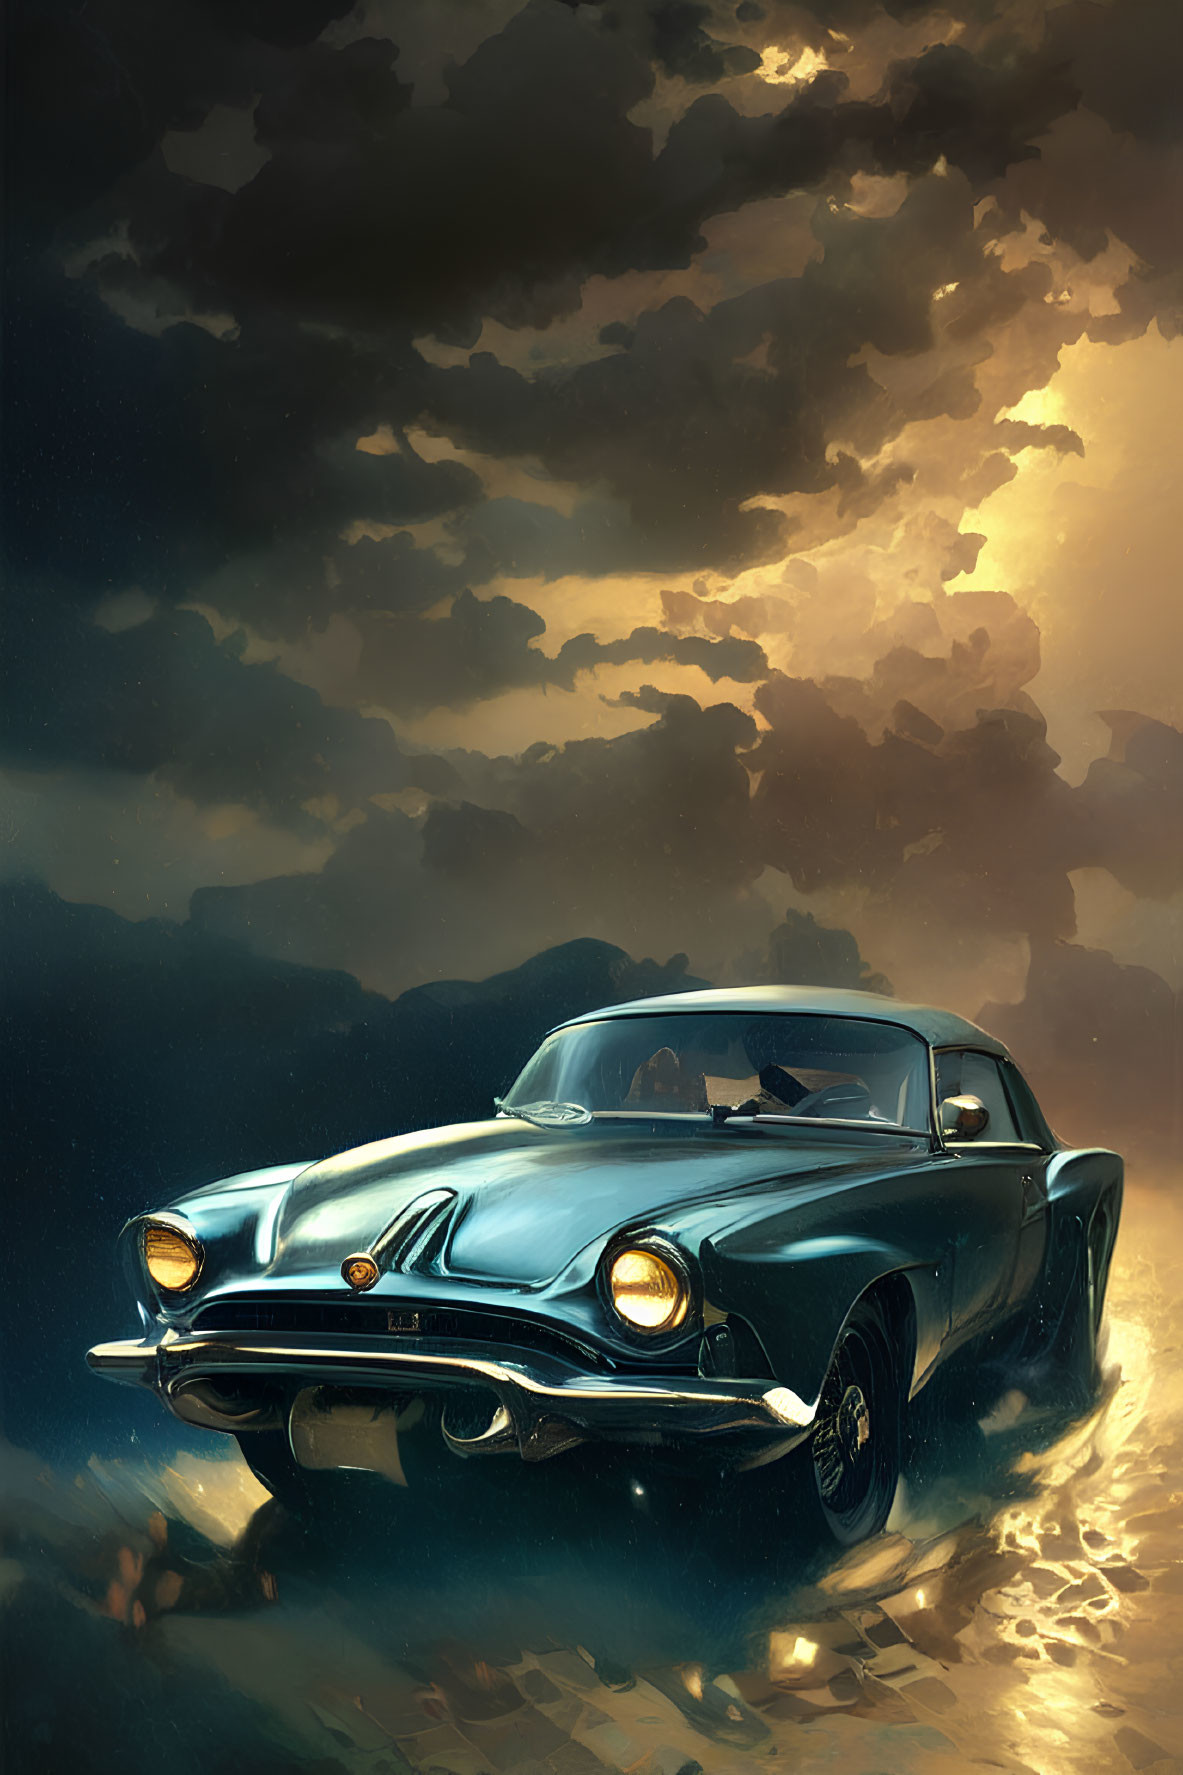 Vintage car on empty road under dramatic sky with sunbeam